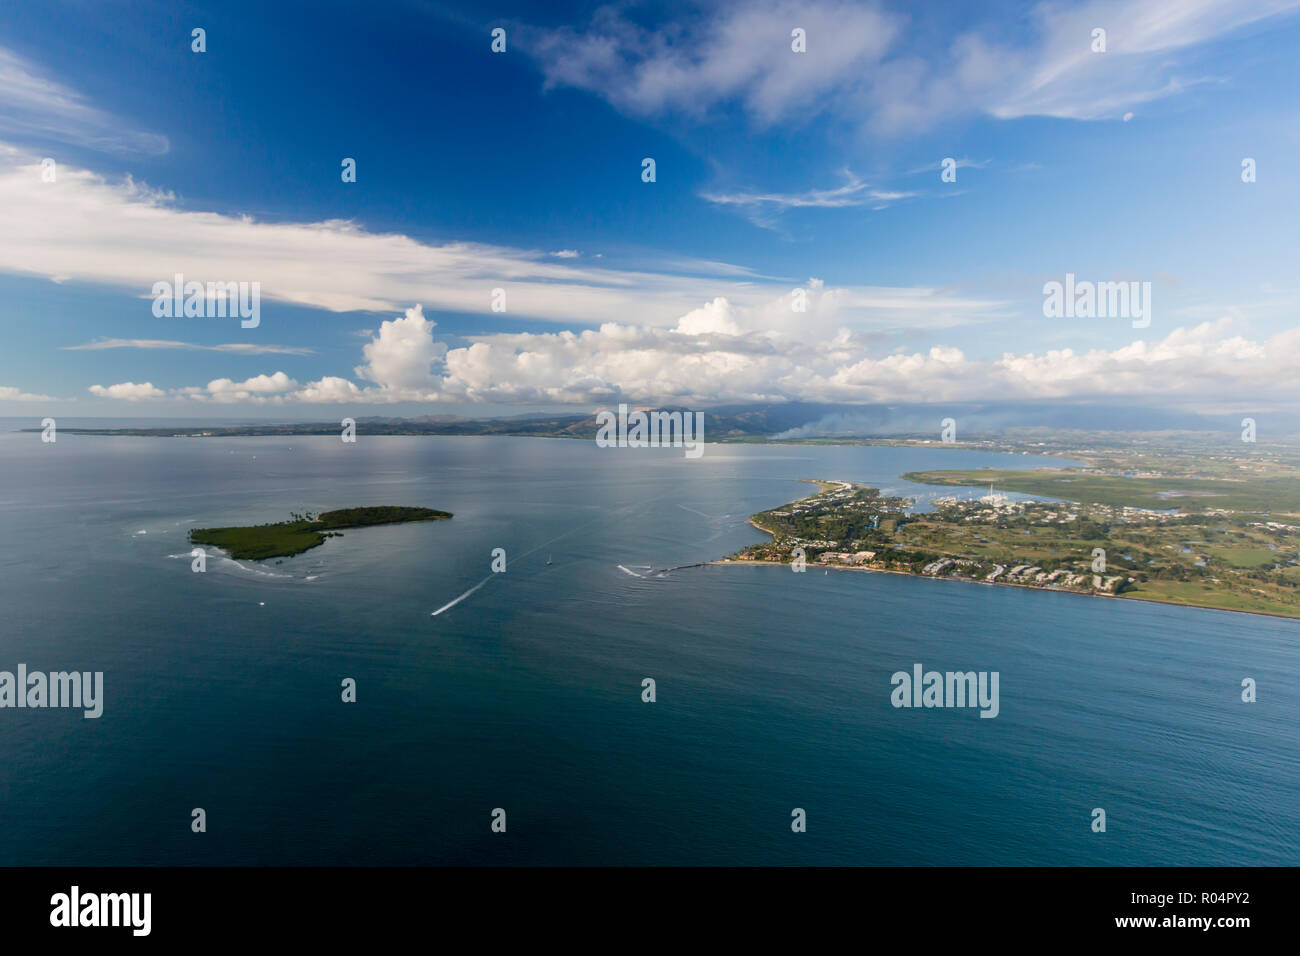 Aerial view of South Seas Island, just offshore from Viti Levu, Republic of Fiji, South Pacific Islands, Pacific Stock Photo